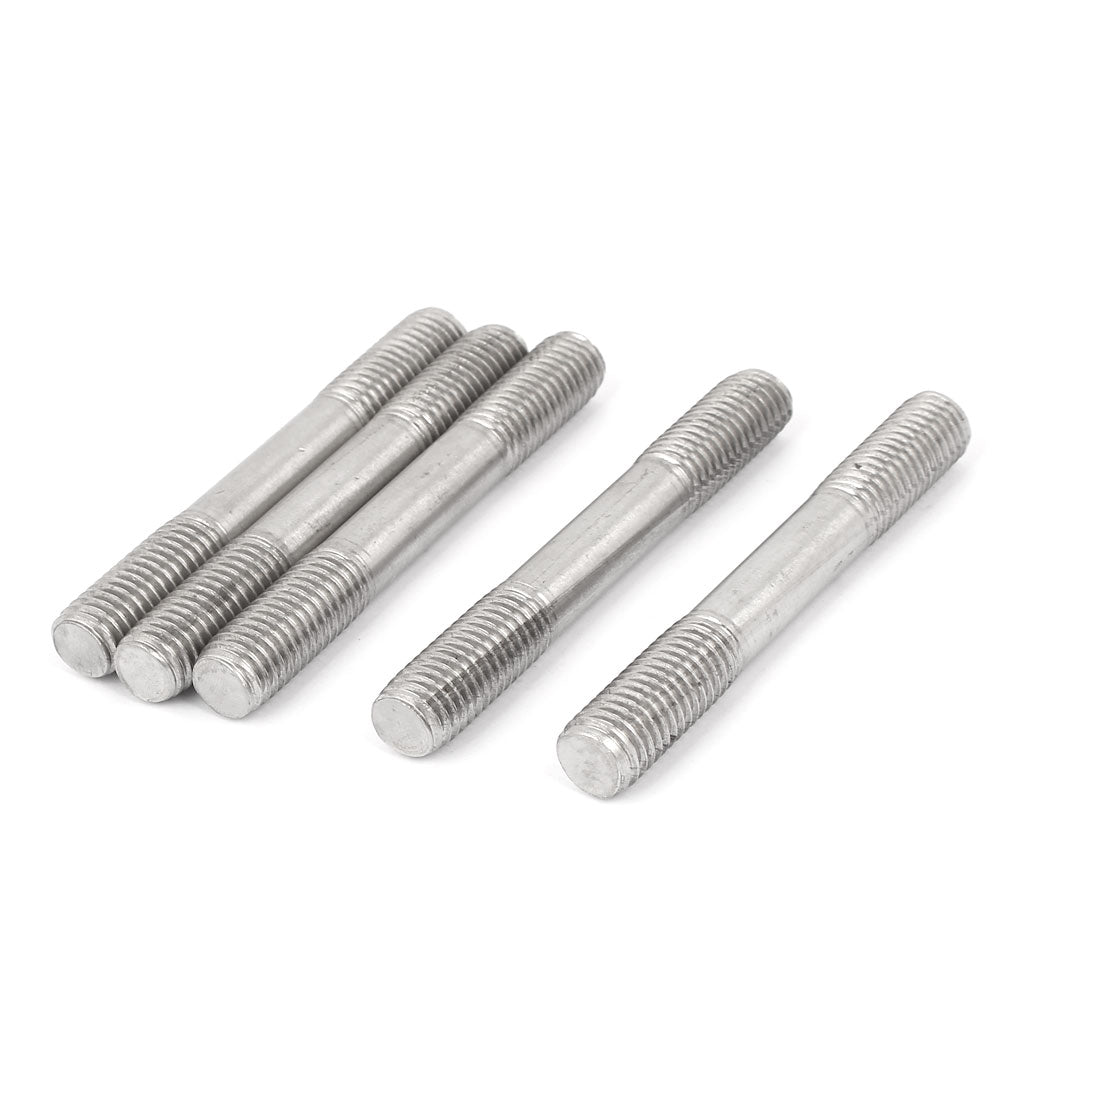 uxcell Uxcell M12 x 90mm 304 Stainless Steel Double End Thread Stud Teeth Rod 5pcs